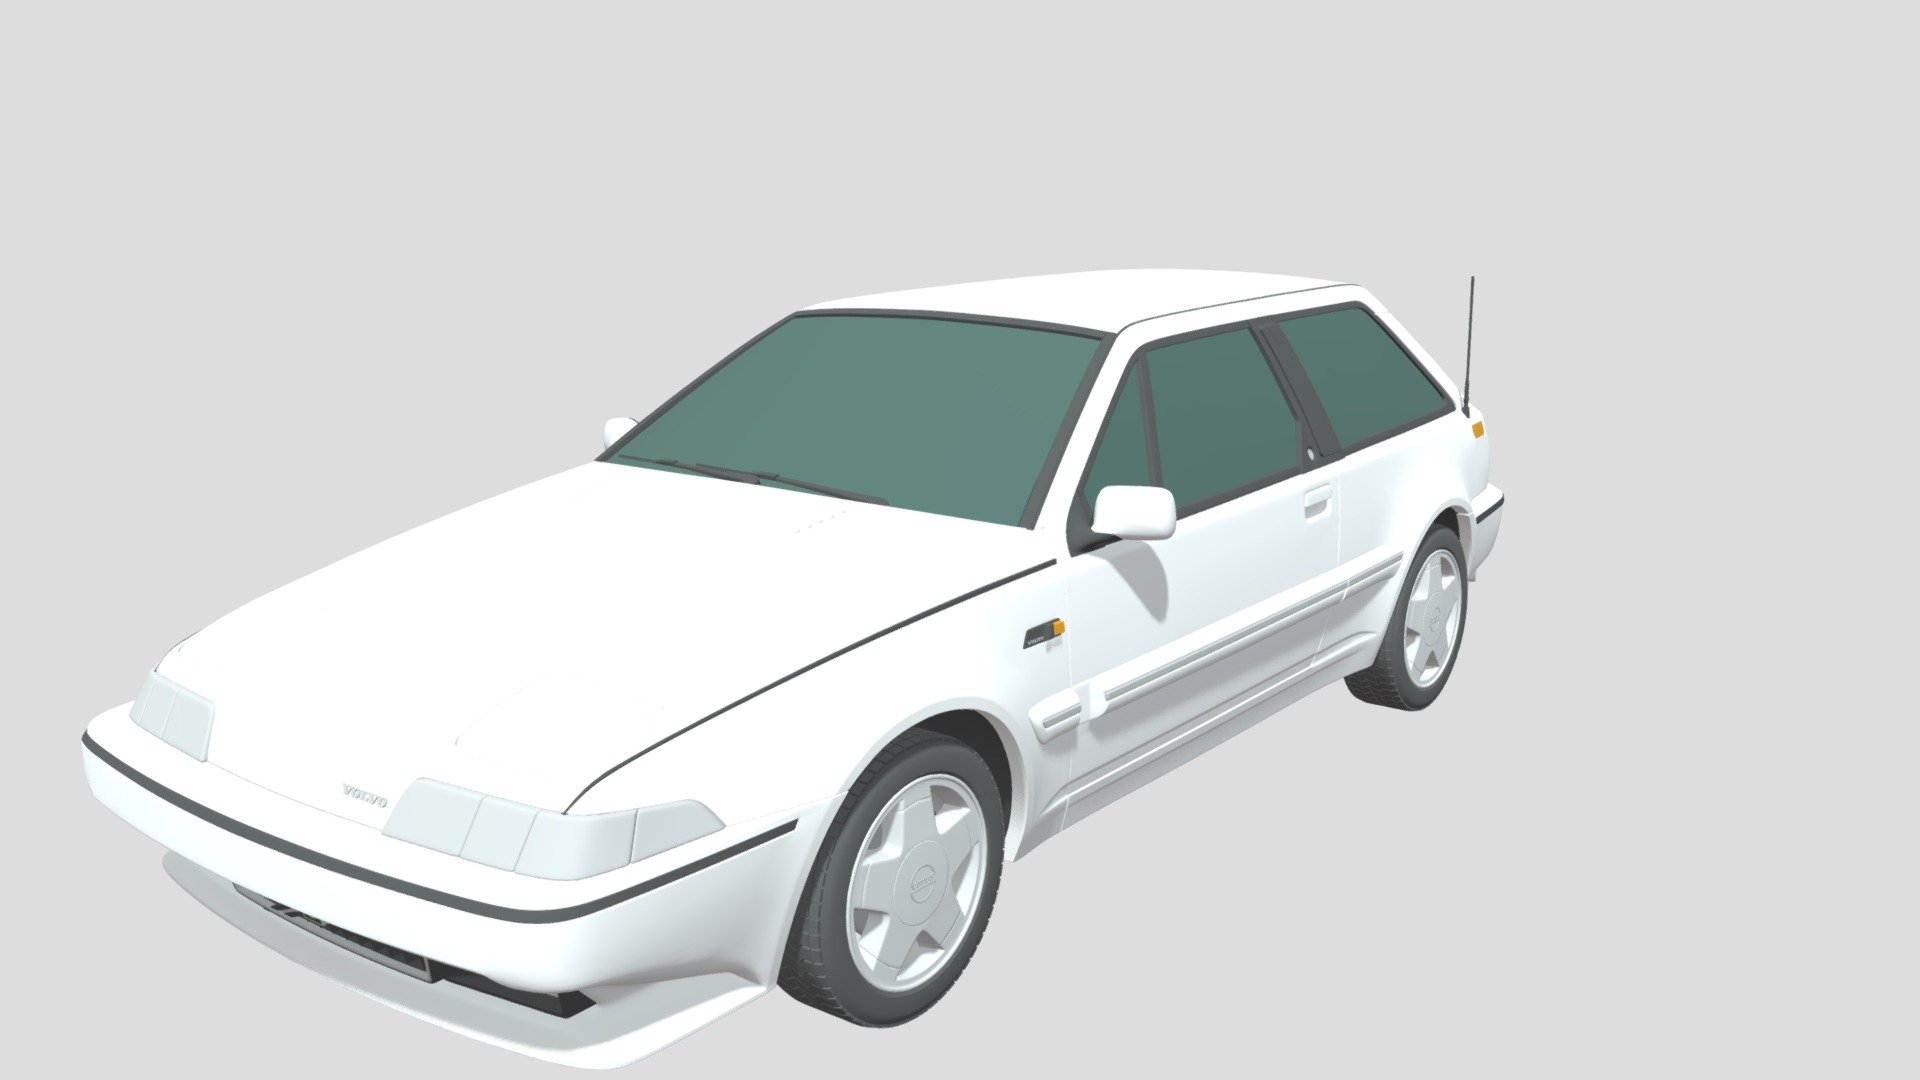 Introducing our stunning photorealistic 3D model of the Volvo 480 (1987) car, a true masterpiece of digital craftsmanship that will elevate your projects to the next level. This meticulously crafted model captures every curve, detail, and essence of a real Volvo 480 (1987) car, providing you with unparalleled realism and versatility for your creative endeavors.

Our photorealistic 3D model of the Volvo 480 (1987) car is a testament to precision and attention to detail. Each contour, from the sleek body lines to the intricacies of the headlights and tail lights, has been painstakingly recreated to mirror the elegance and realism of a genuine Volvo 480 (1987) automobile. Whether you're an automotive designer, a video game developer, or a filmmaker, this 3D model will bring your visions to life with exceptional fidelity 3d model